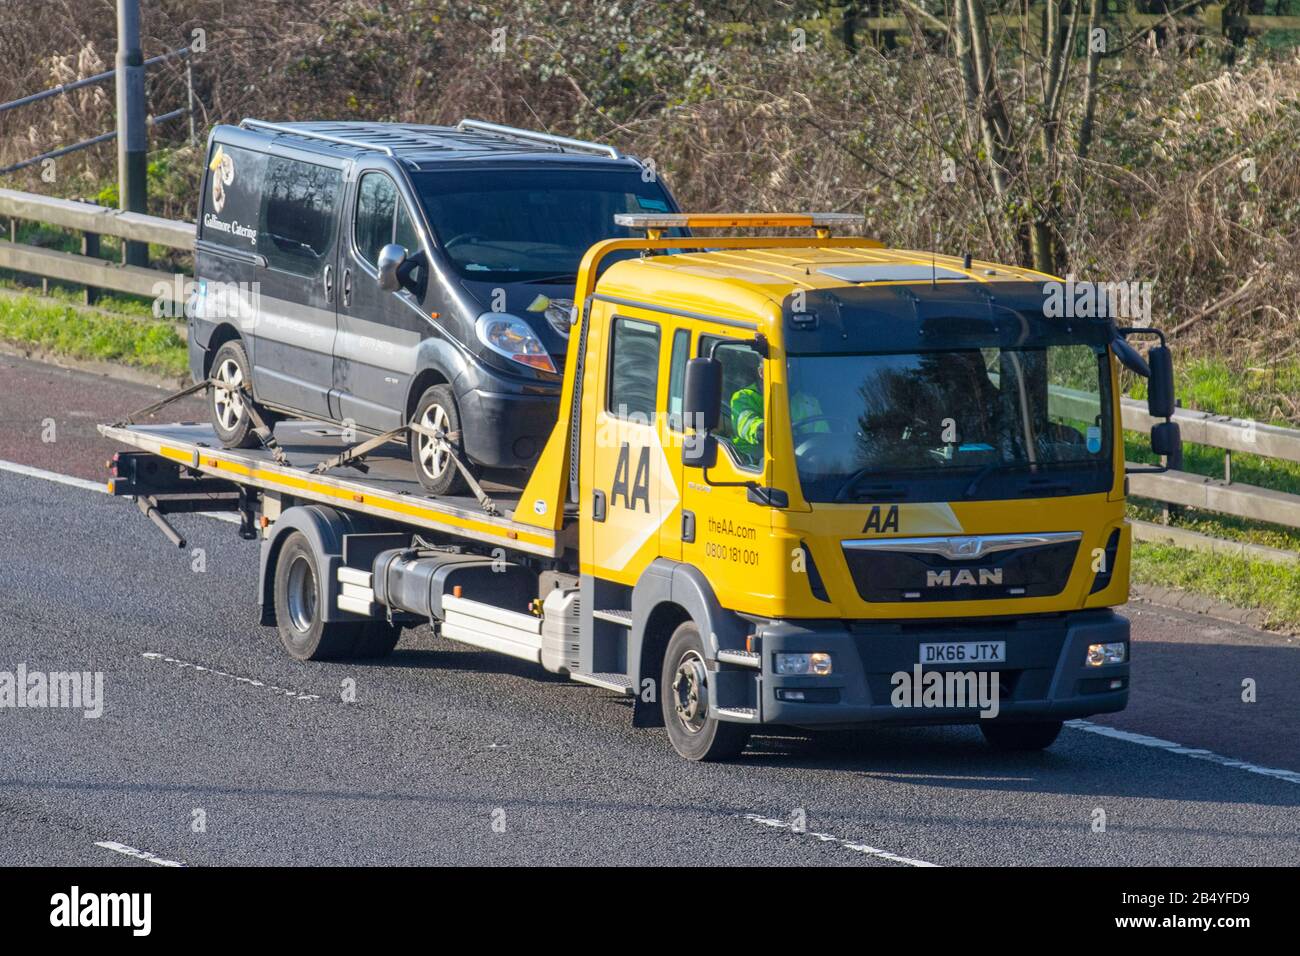 AA Van recovery truck carrying broken down van; Side view of rescue breakdown recovery lorry truck transporter transporting unmarked black van driving along  M6, Lancaster, UK; Vehicular traffic, transport, modern, north-bound on the 3 lane highway. Stock Photo